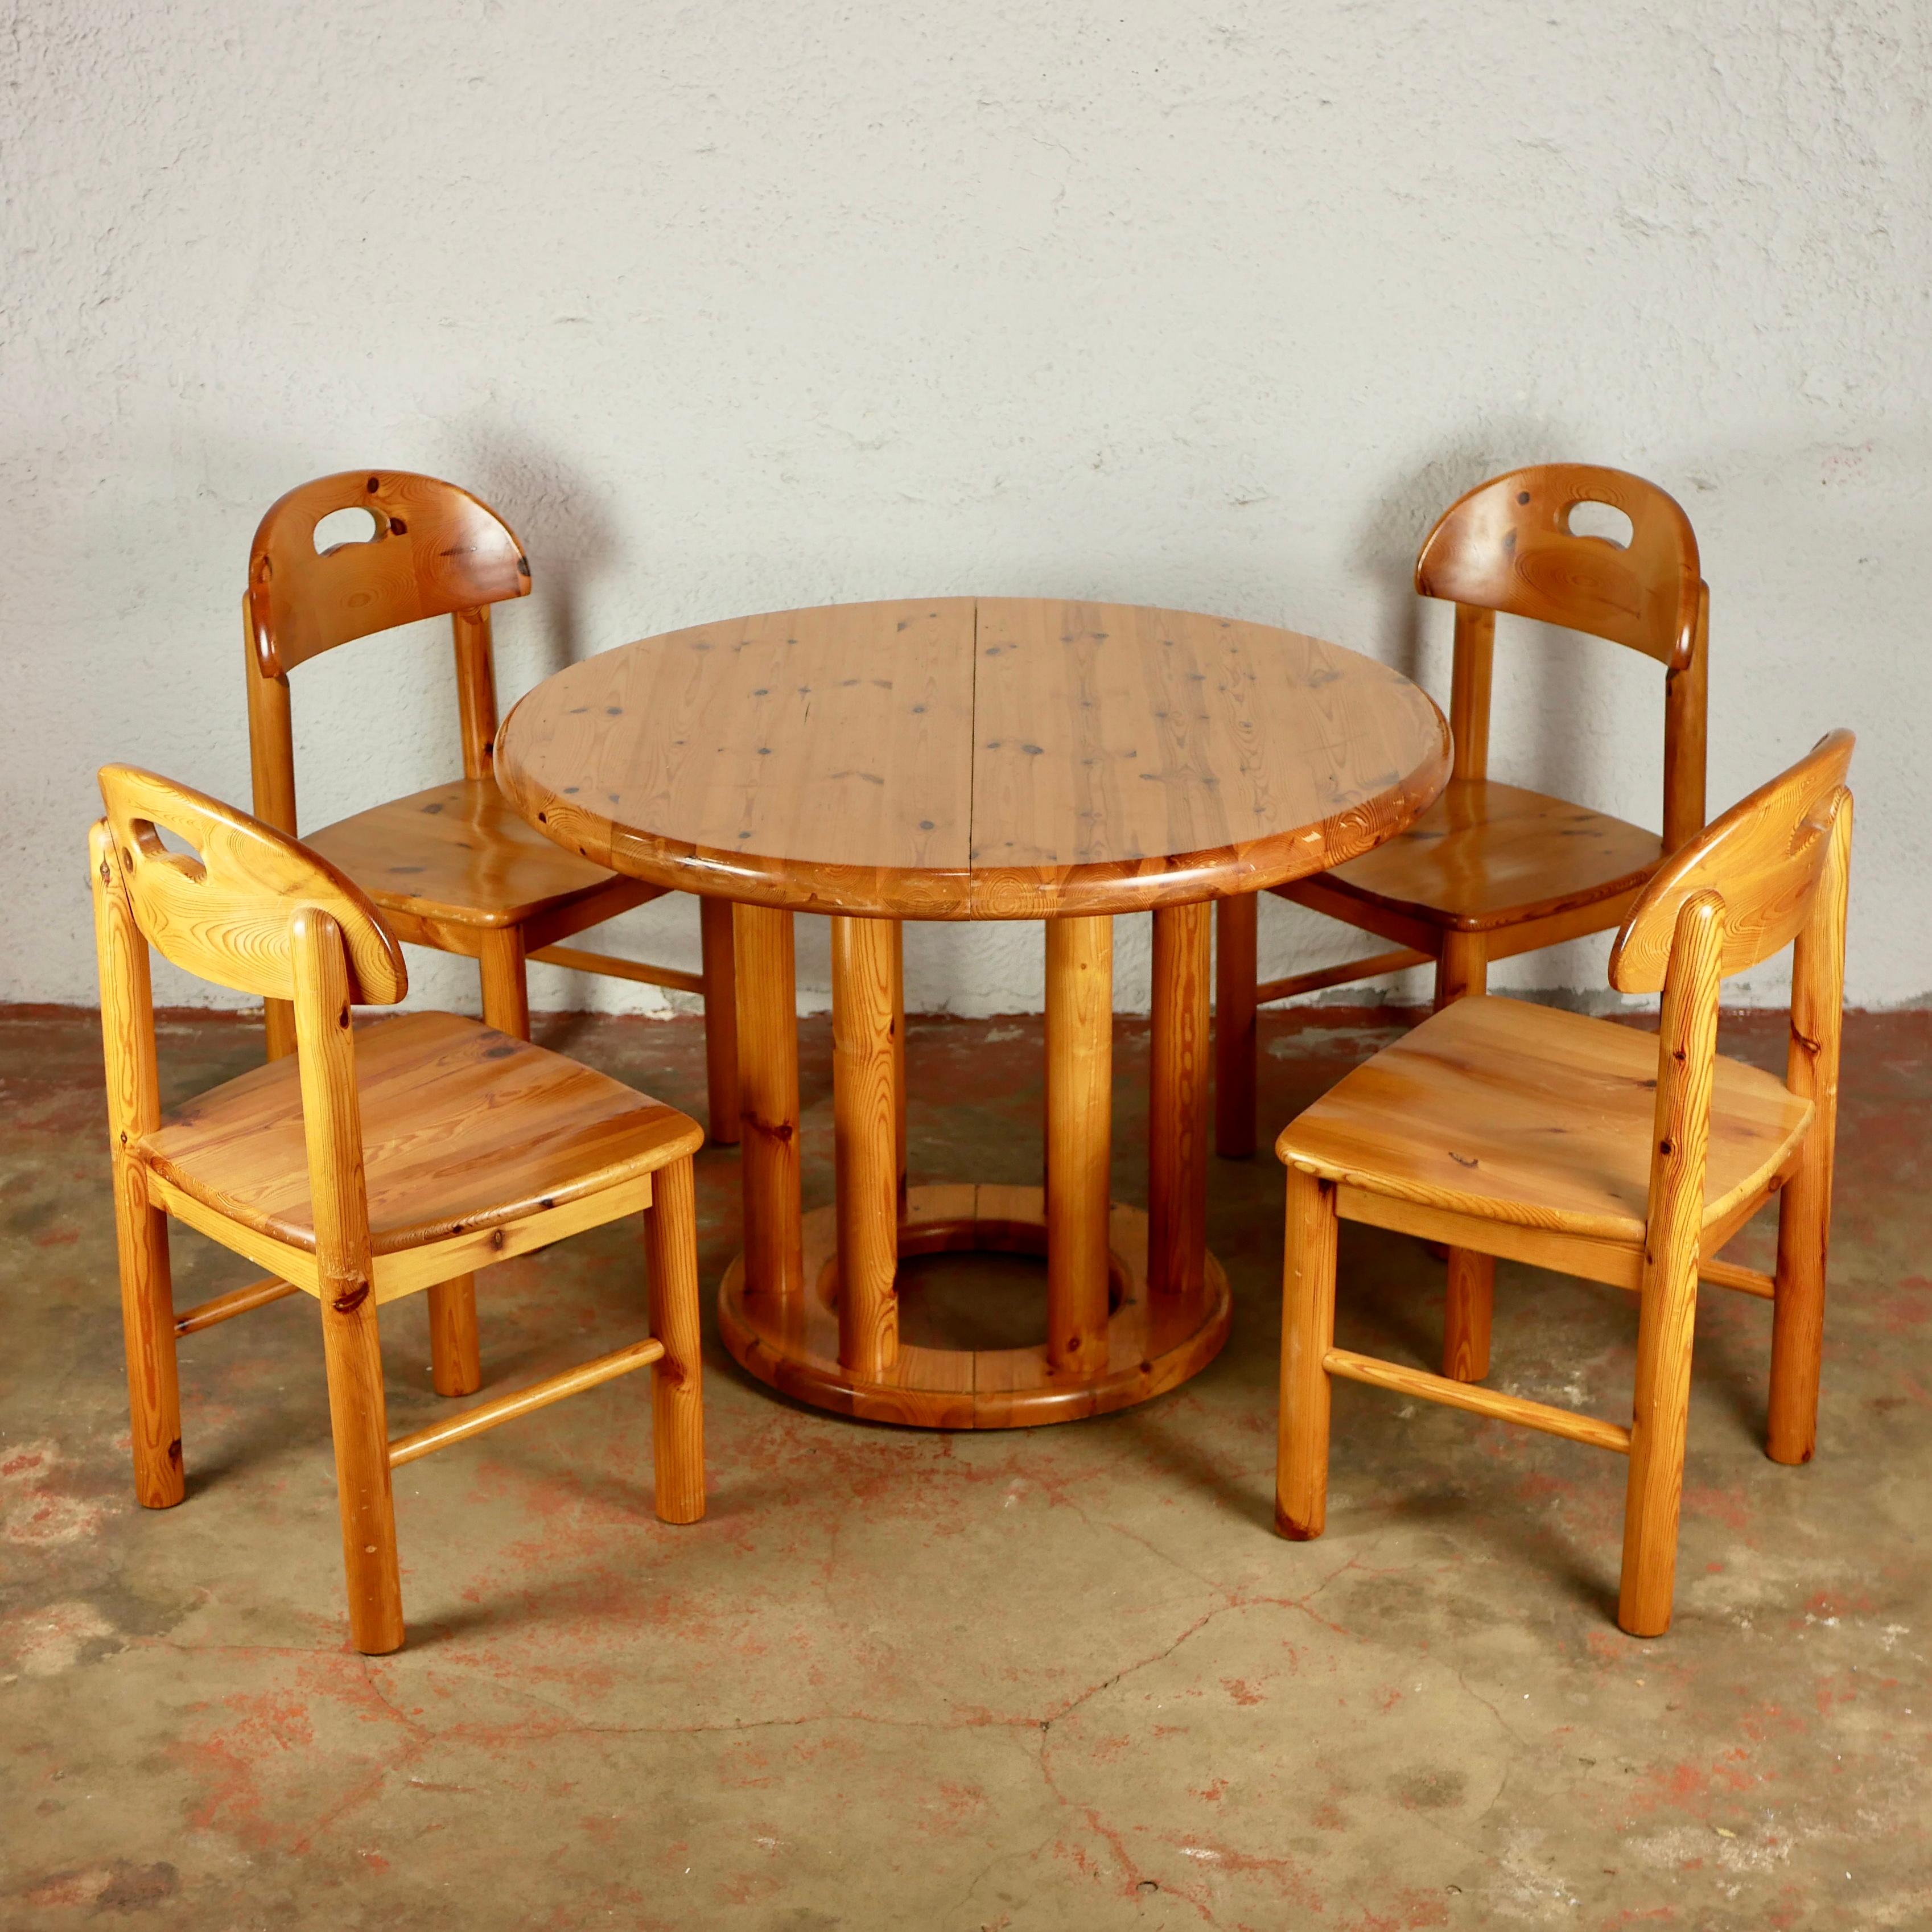 Wonderful dining room set designed by Rainer Daumiller for Hirtshals Savværk, Denmark, in the 1970s, made of 1 extendable table with 2 extensions, and 4 sturdy chairs, all in massive pine wood. 
Curvy lines, perfect for adorable interiors. 
The 2